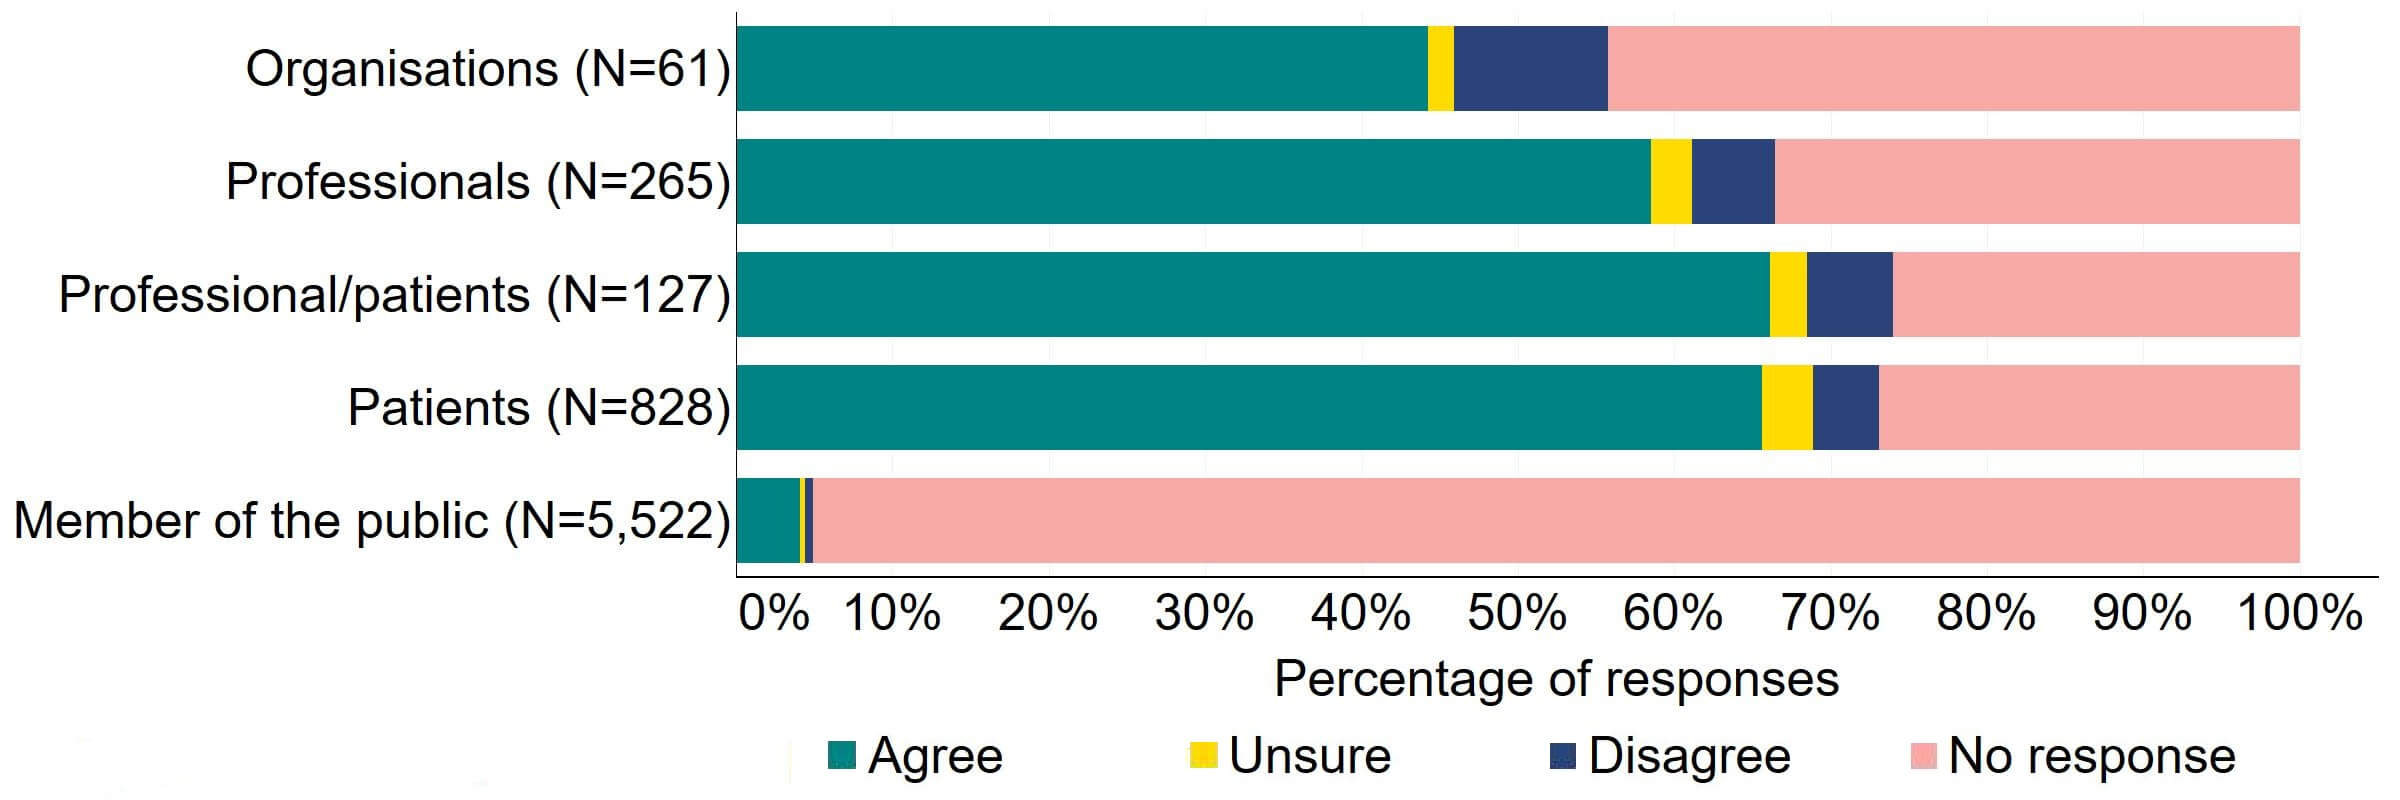 Figure 9 is a stacked bar chart showing the proportion of respondents in each response group who agreed, disagreed, were unsure, or who did not provide a response to the proposal. The underlying data can be downloaded as an Excel worksheet at the top of the page.